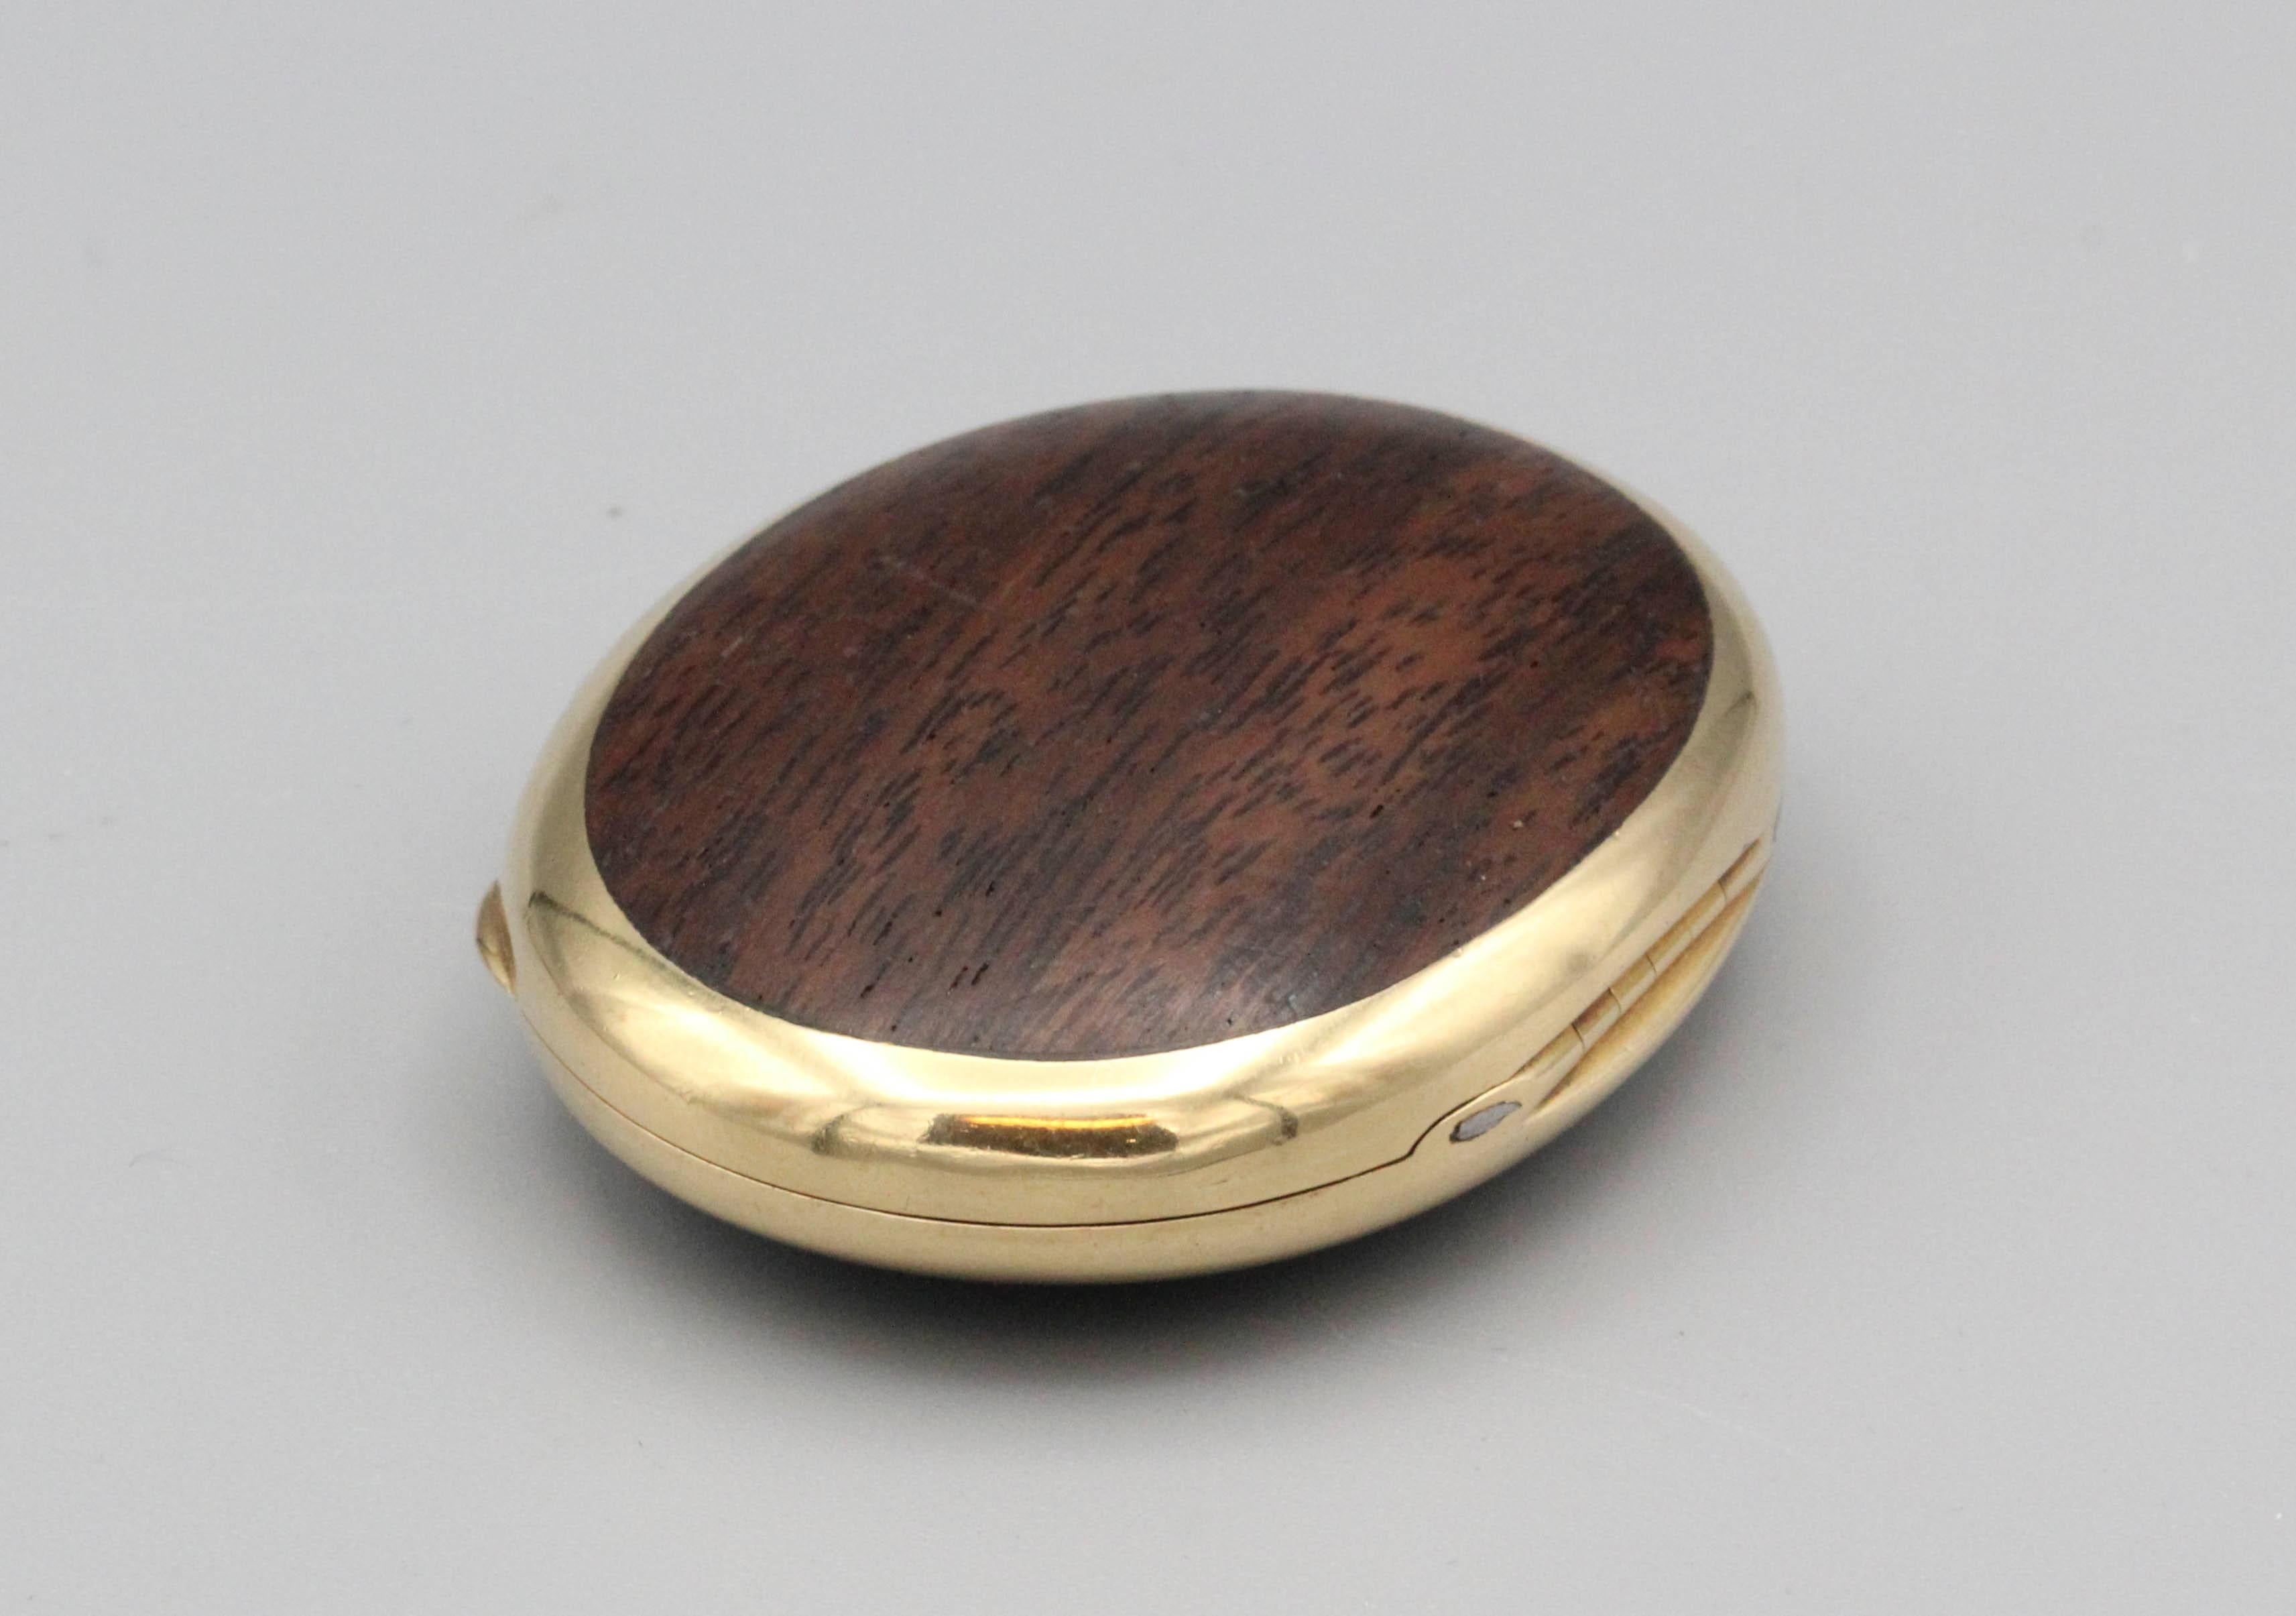 Fine wood and 18k gold oval shaped pill box, by Cusi, circa 1980s.  Made in 18K yellow gold and with polished hard wood inlay. The pill box opens via a push button release and weighs approx. 43 grams.; measuring over 2 inches in length, over 1.5